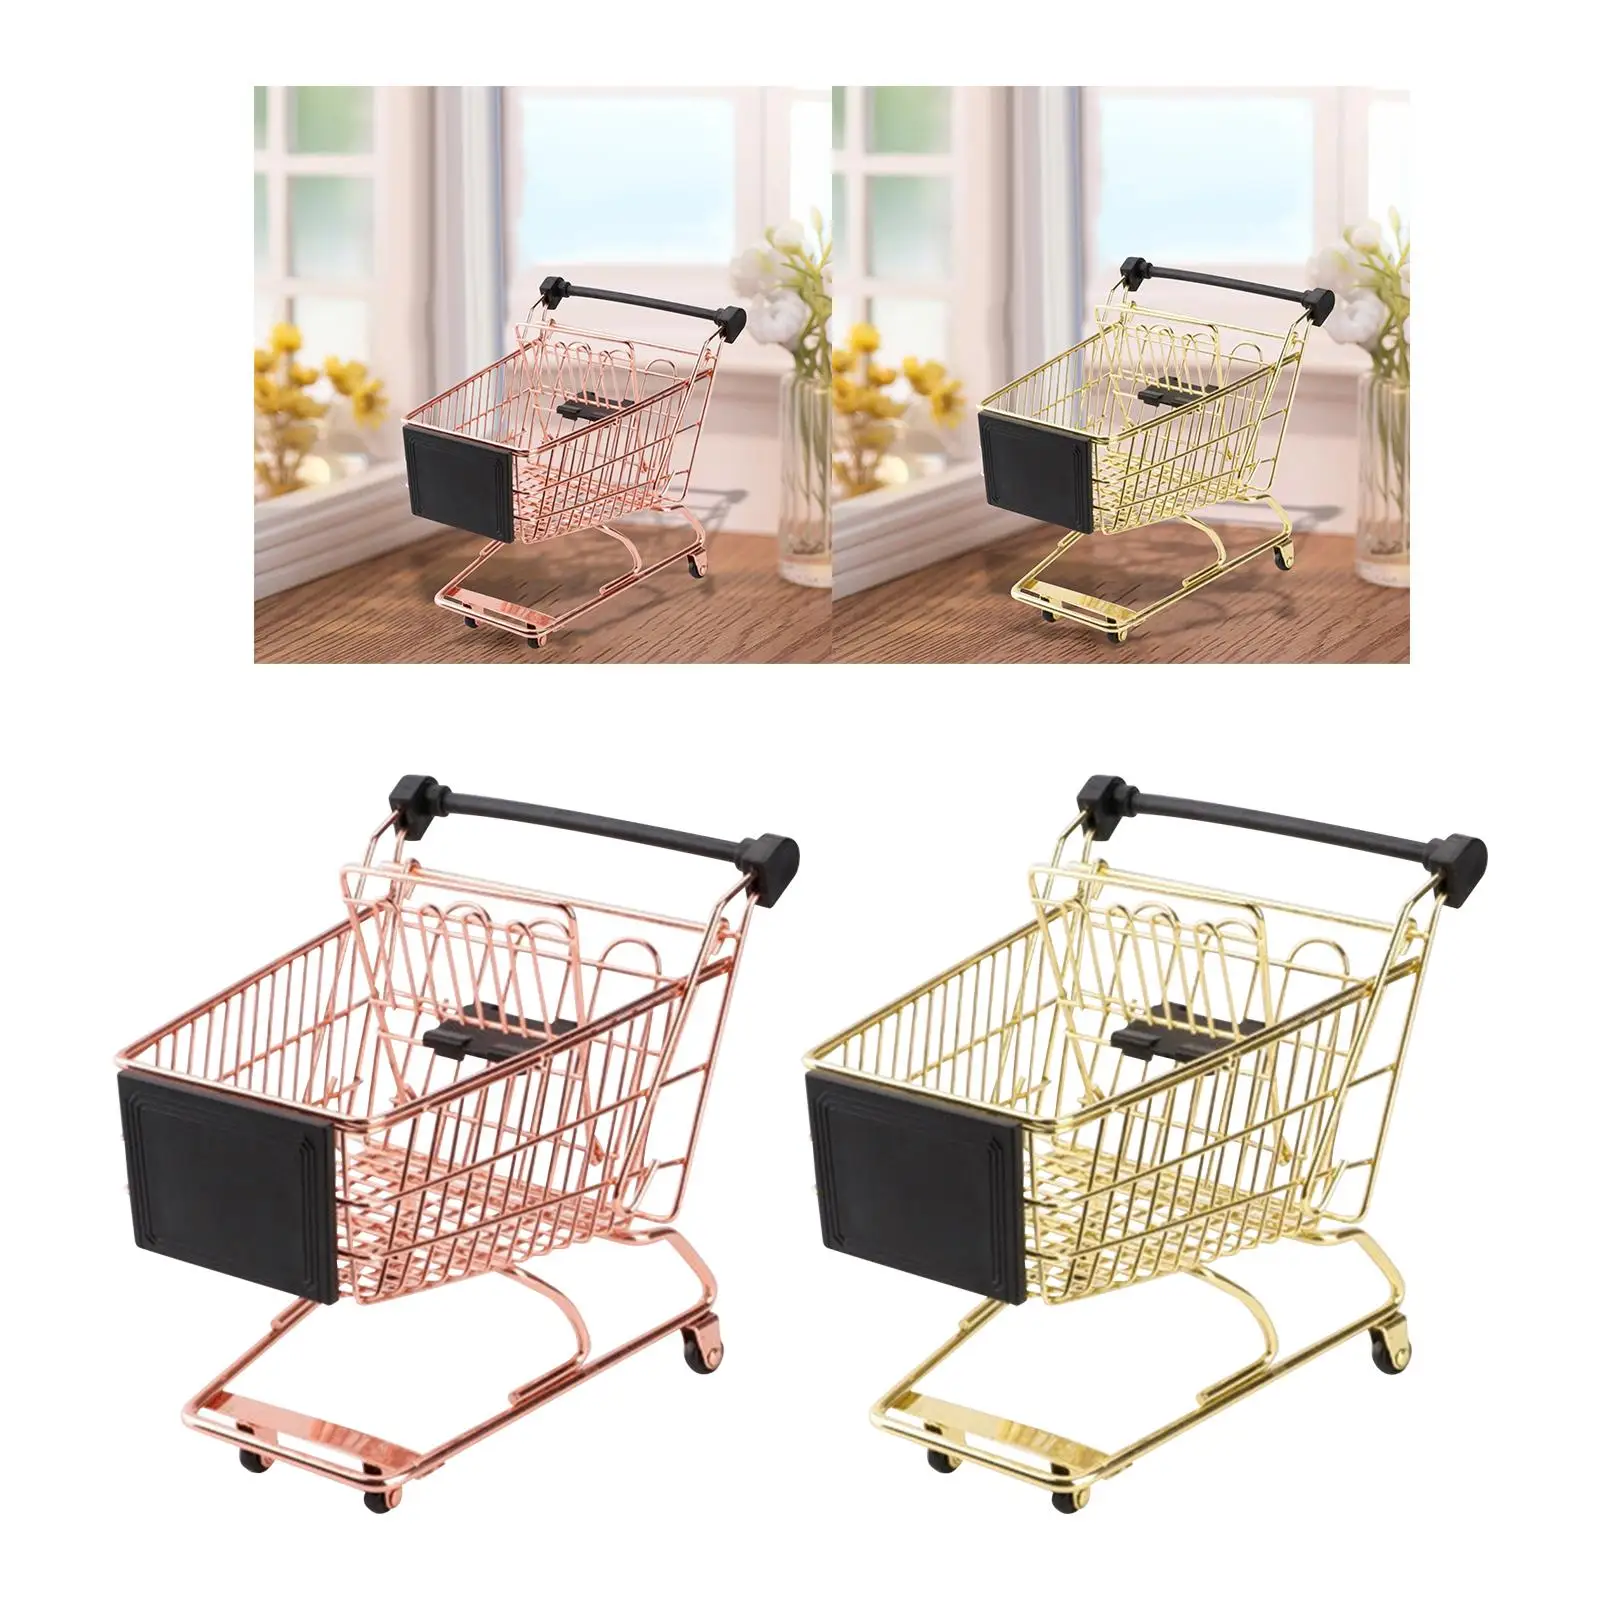 Mini Shopping Cart Photo Props Early Educational Party Favors for Kids Girl